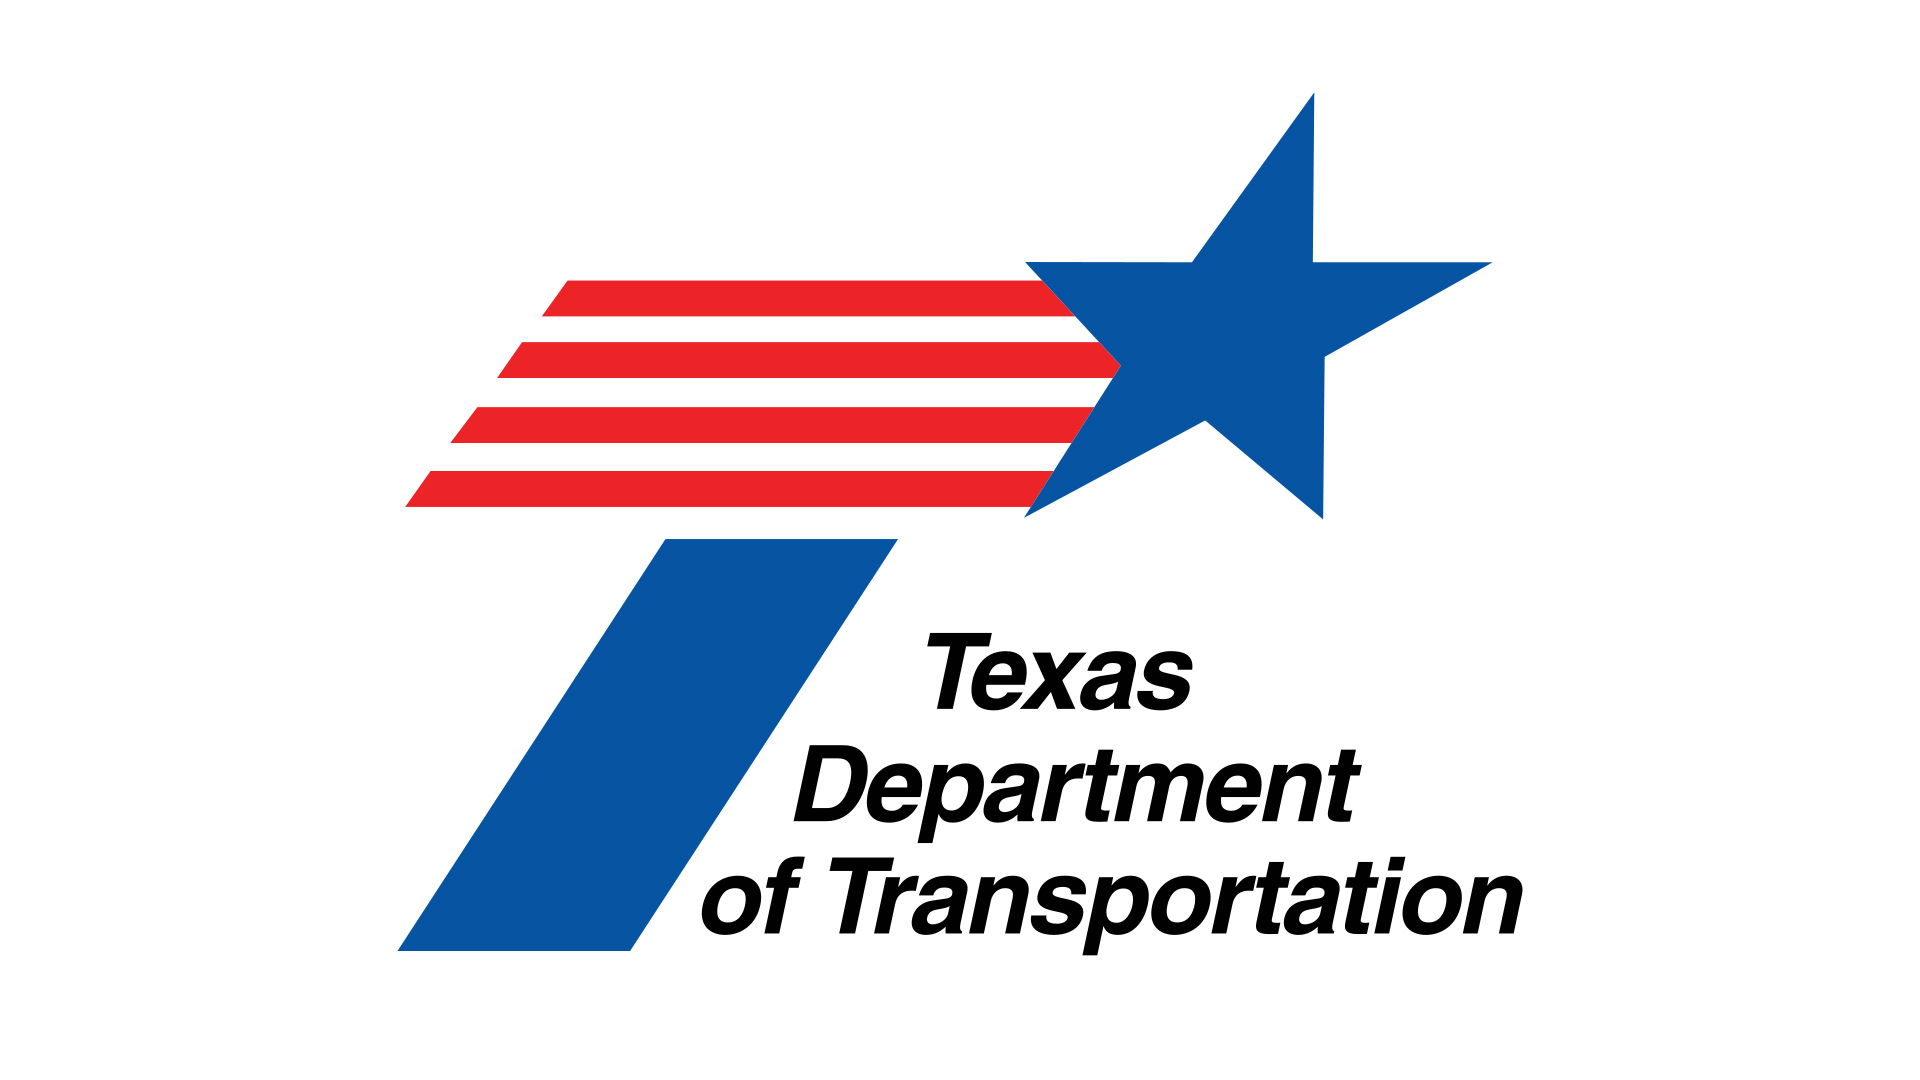 Brookshire, Katy recognized as mobility hubs in TxDOT study for regional transportation improvements Photo